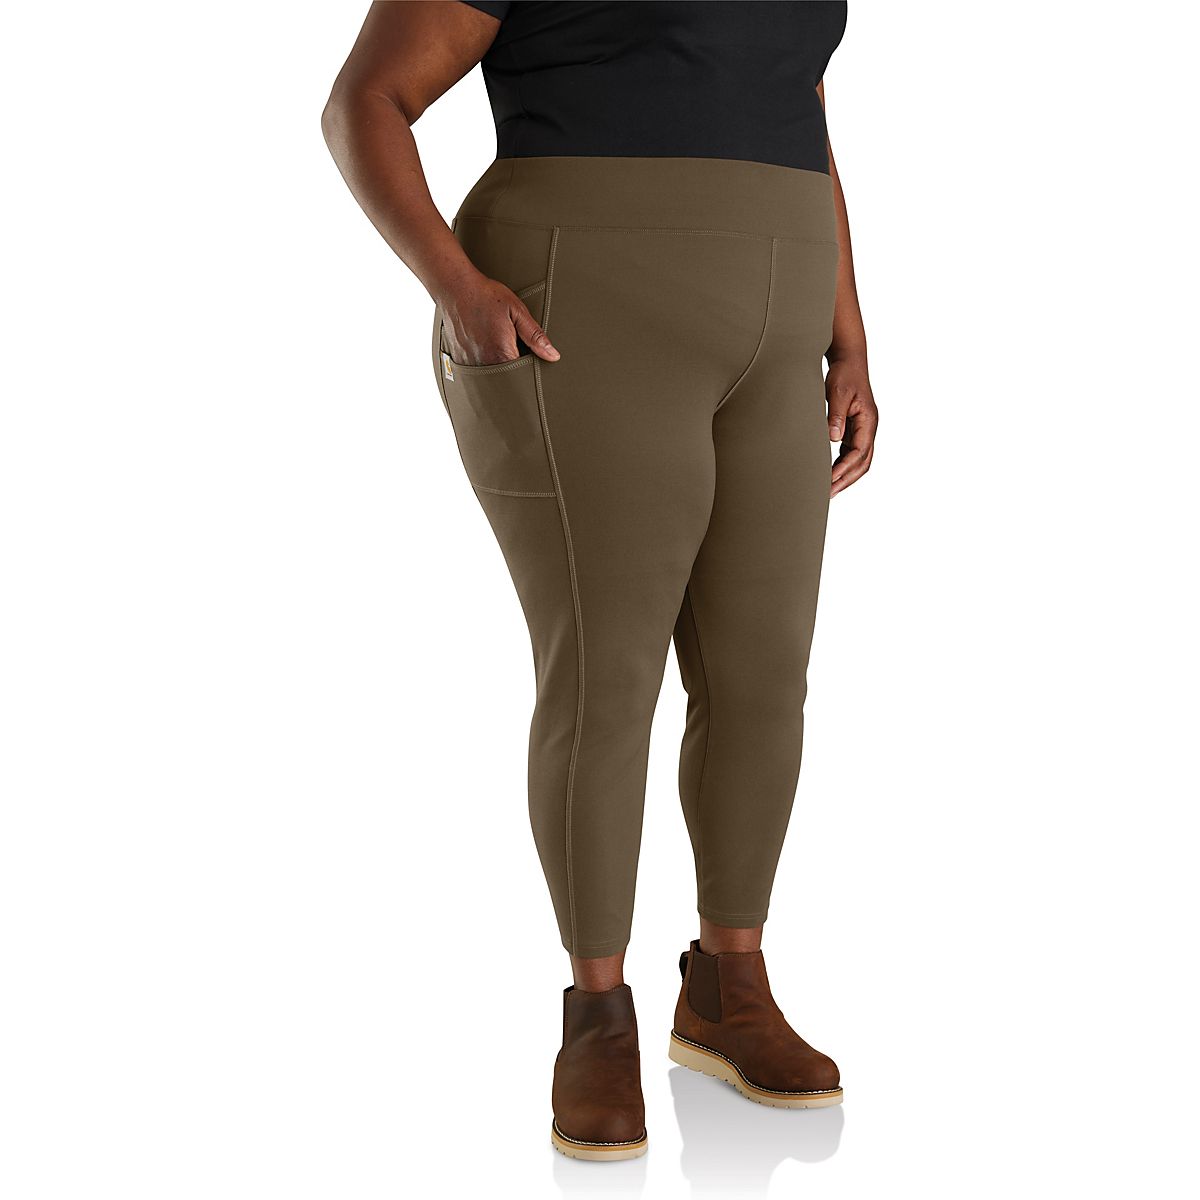 CarharttwomensForce Fitted Heavyweight Lined Legging (Plus  Size)BlackX-Large Tall